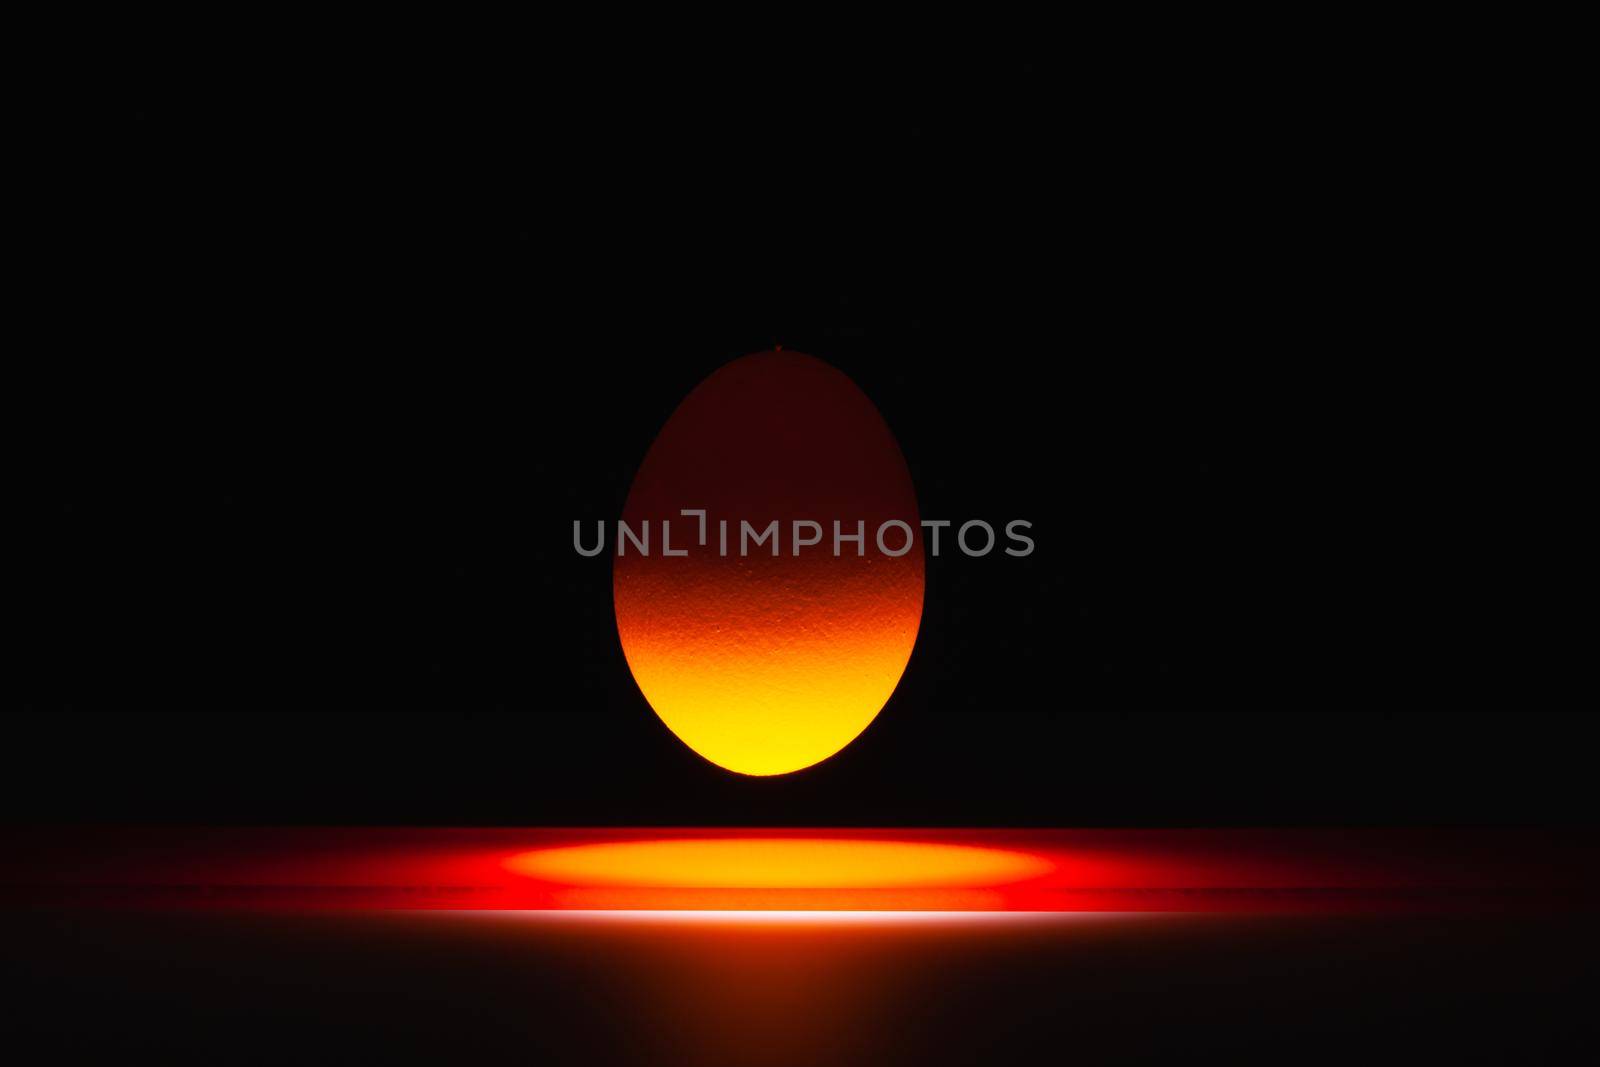 Red egg levitating over a black glass table in the dark room.